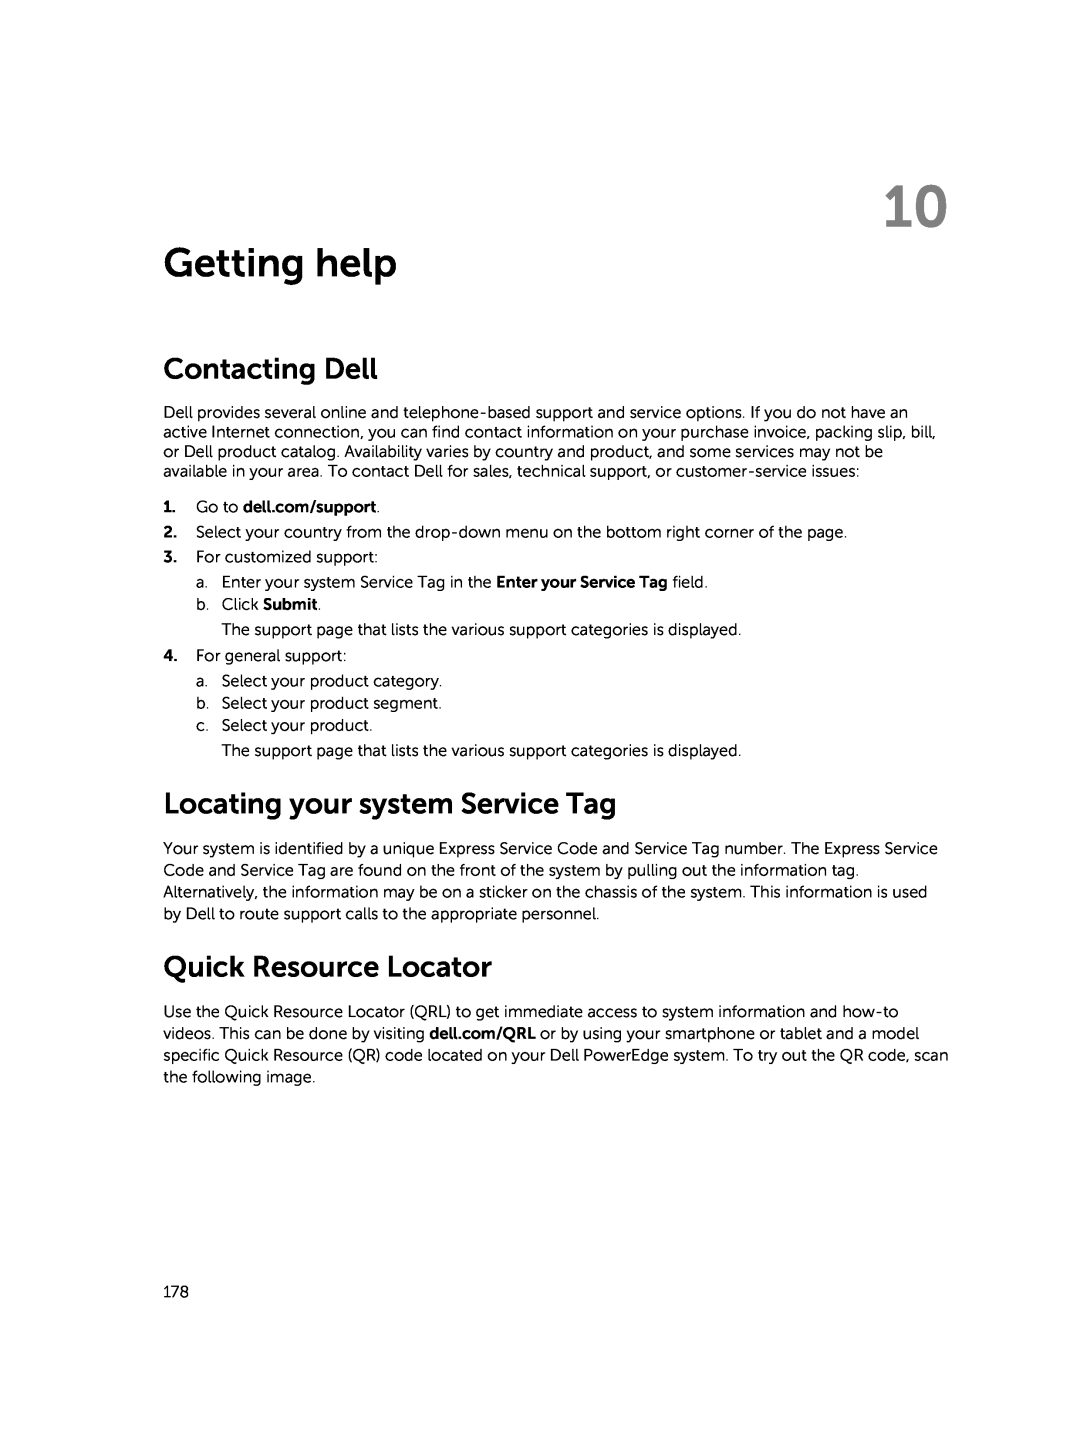 Dell E30S owner manual Getting help, Contacting Dell, Locating your system Service Tag, Quick Resource Locator 